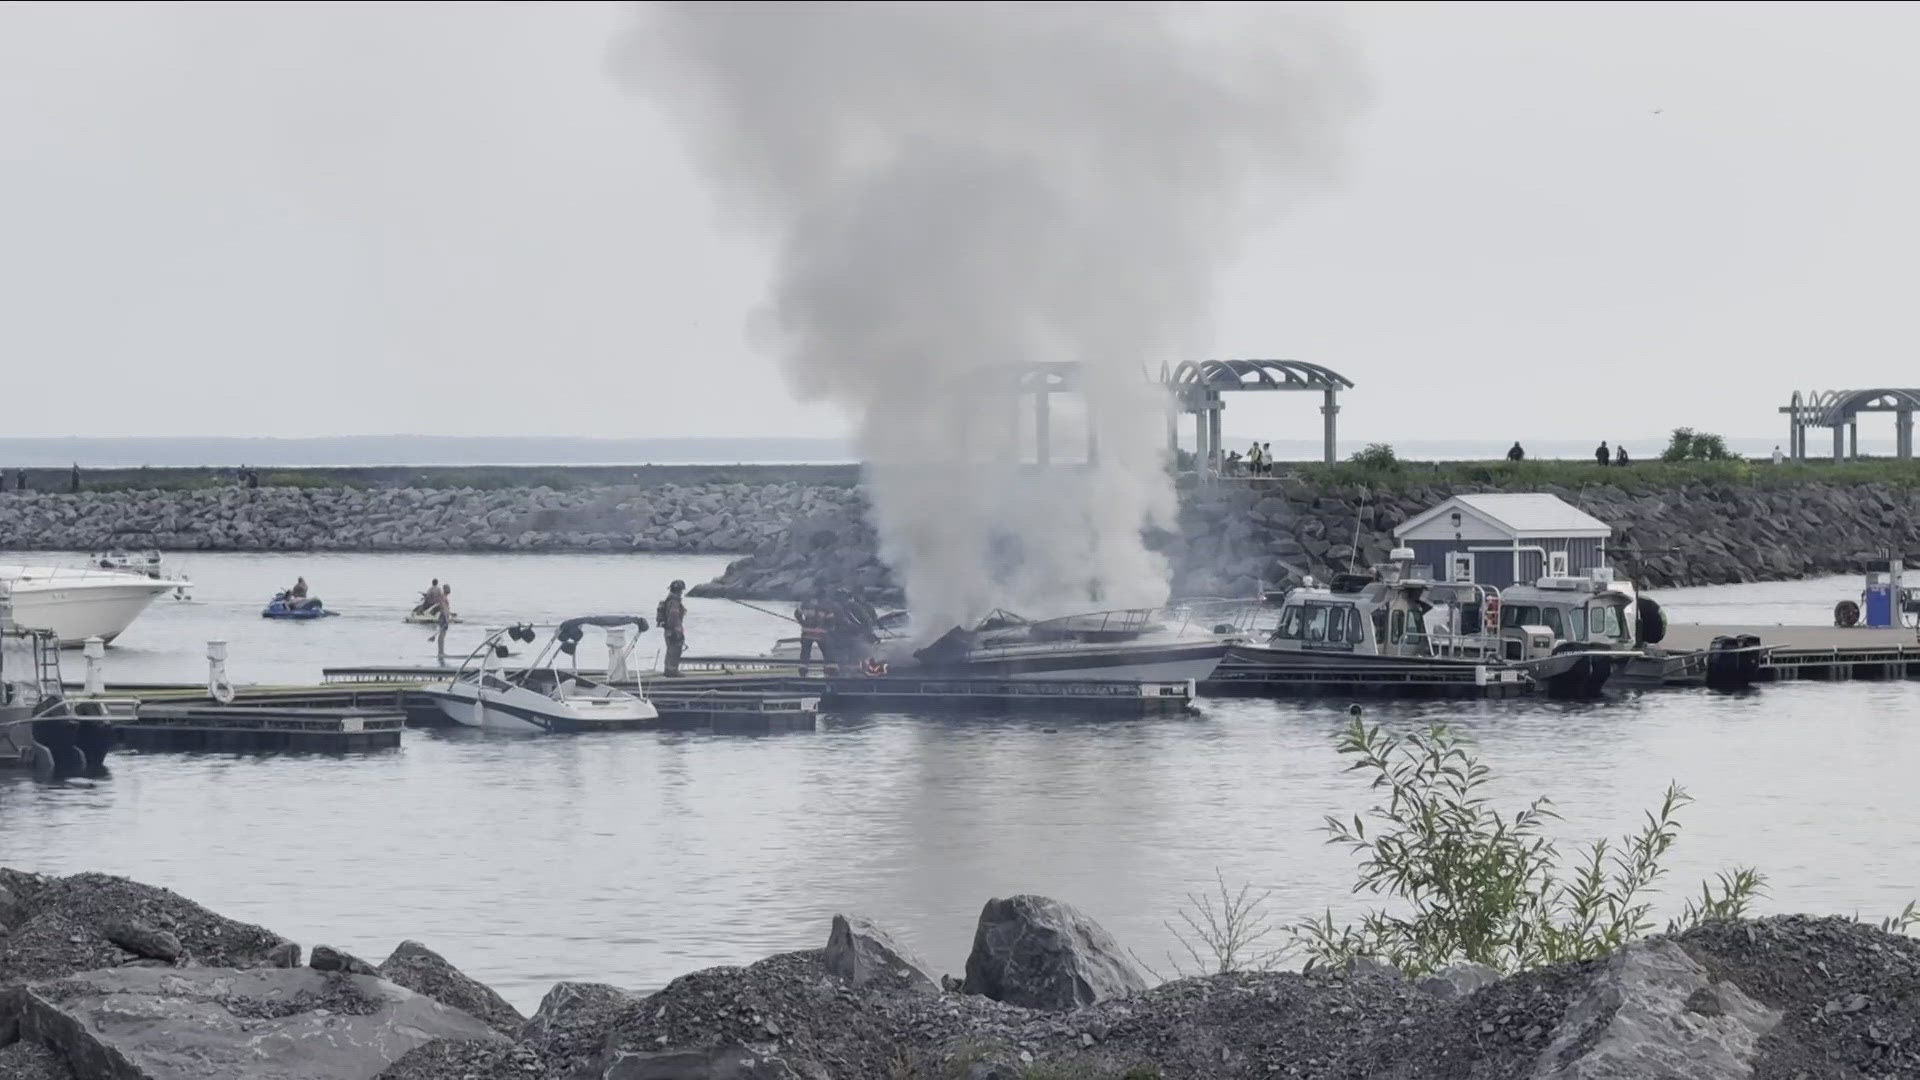 The boat fire was reported around 6:45 p.m. Thursday. Two people were on board.